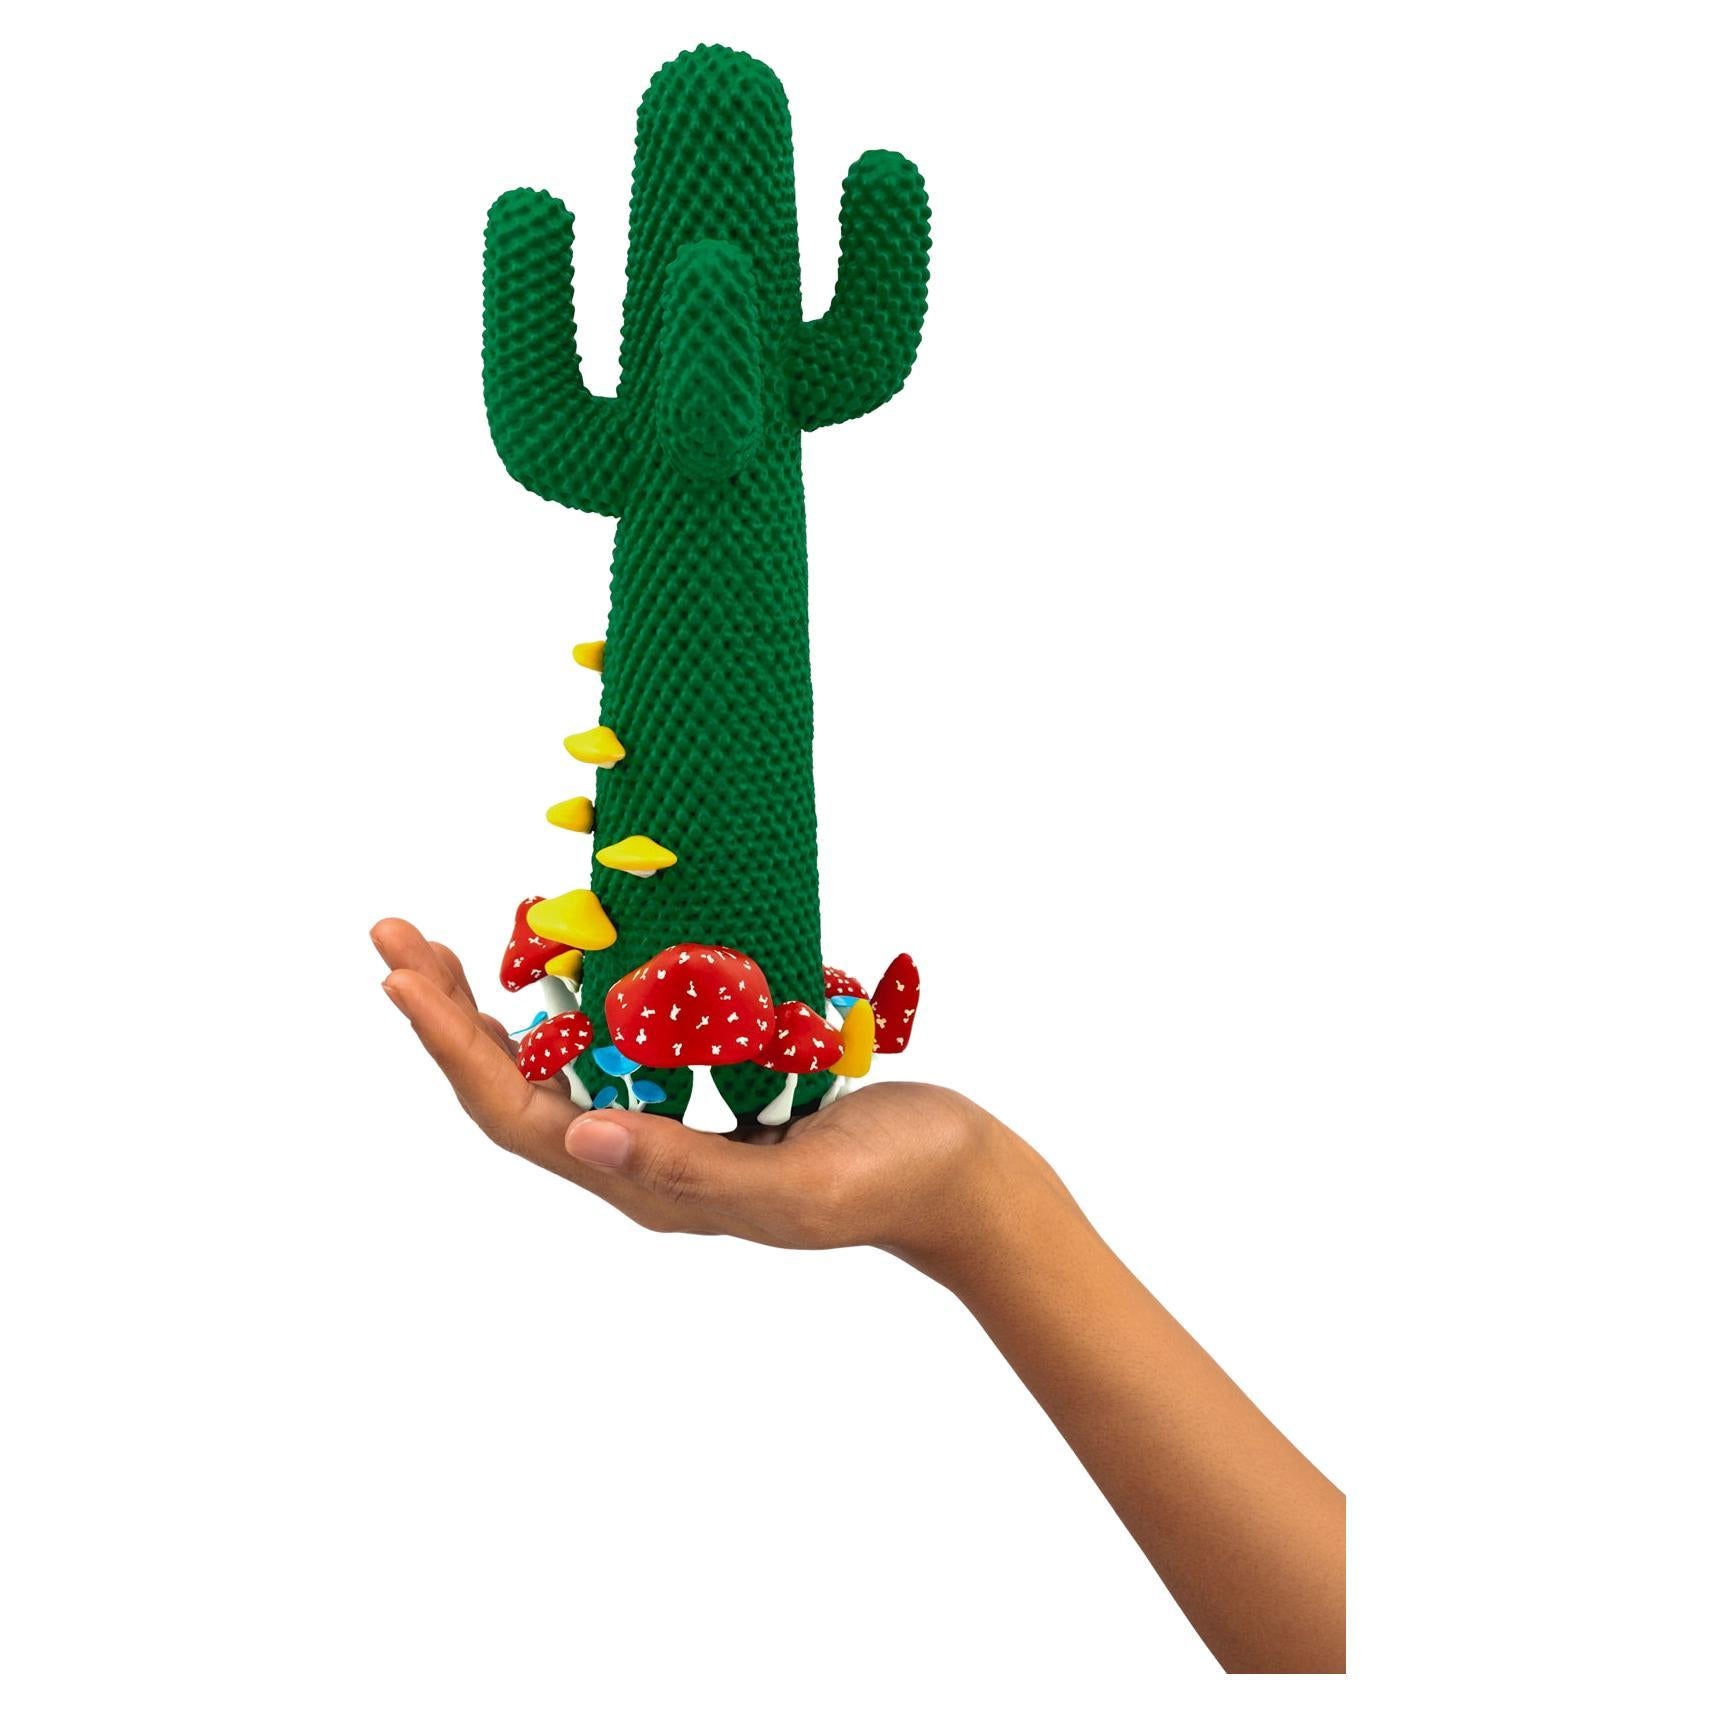 LIMITED EDITION #52/99

Gufram presents the miniaturised version of the Shroom CACTUS® created in collaboration with A$AP Rocky and the artist’s new design studio HOMMEMADE Exactly as the real-size Shroom CACTUS®, the new Guframini piece features